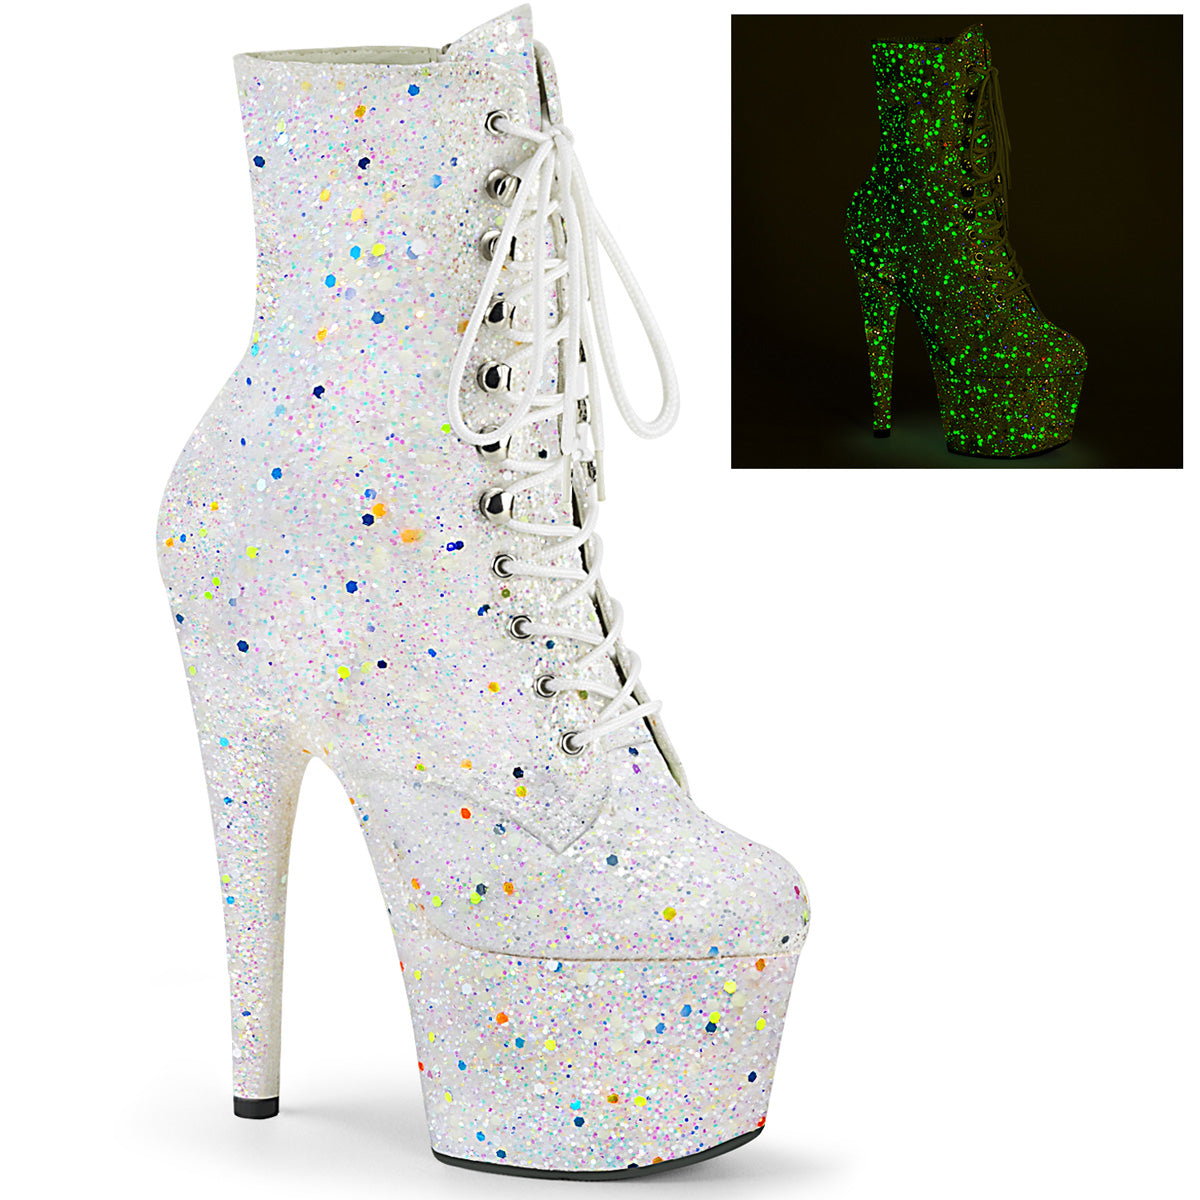 Pleaser Womens Ankle Boots ADORE-1020GDLG White Multi Glitter/White Multi Glitter